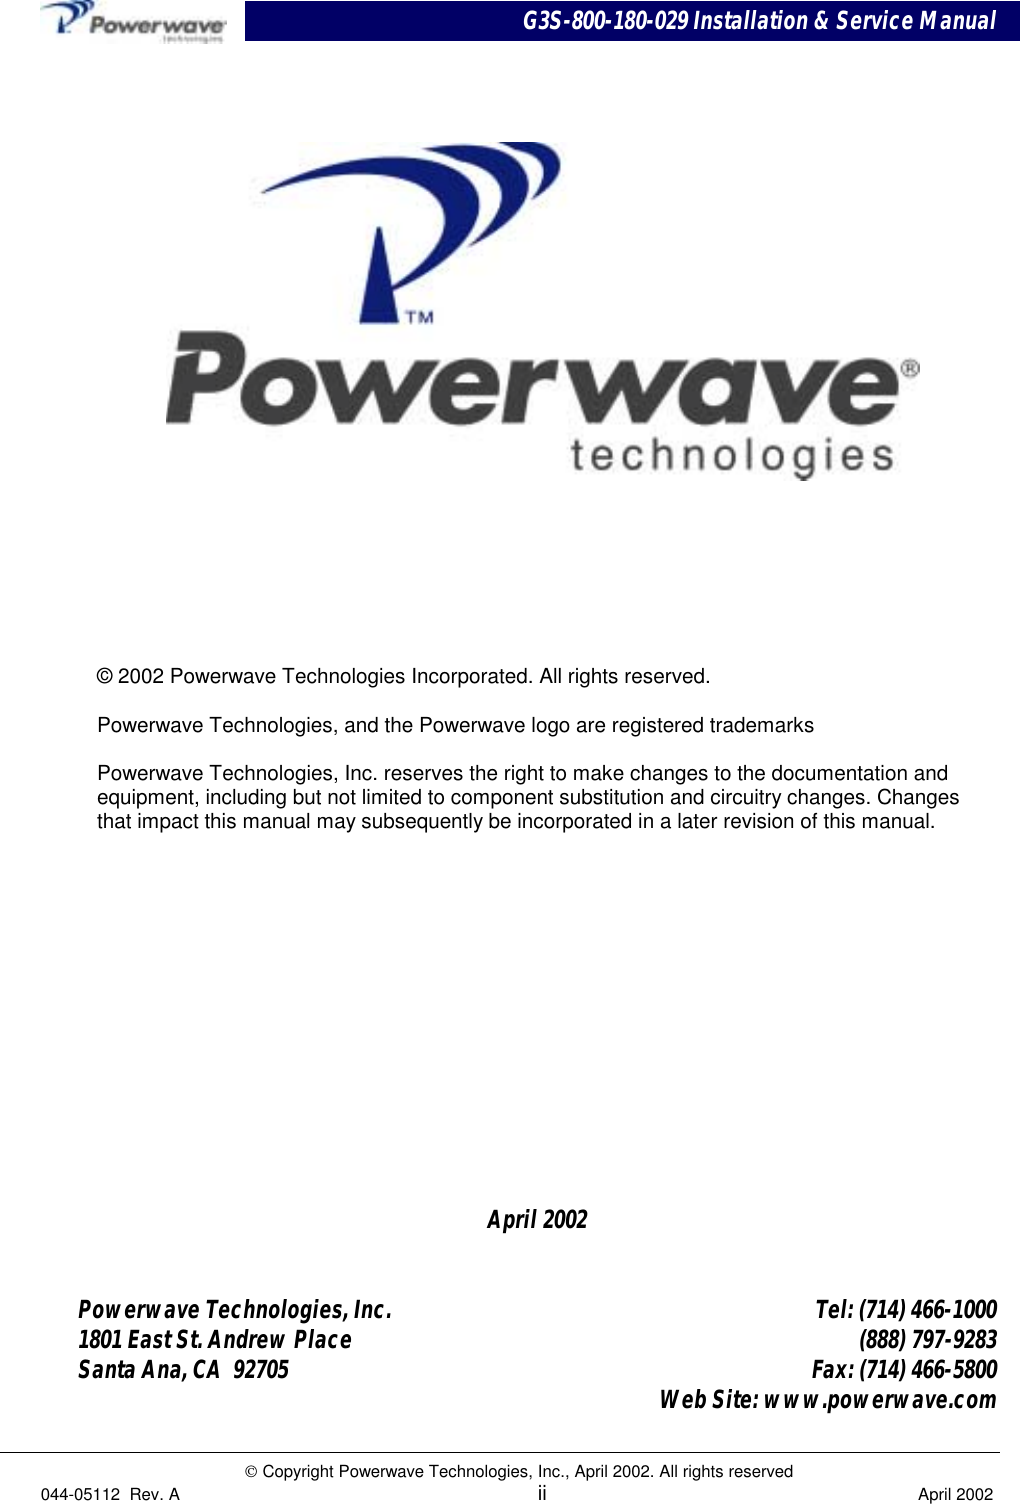 G3S-800-180-029 Installation &amp; Service Manual Copyright Powerwave Technologies, Inc., April 2002. All rights reserved044-05112  Rev. A ii April 2002April 2002Powerwave Technologies, Inc. Tel: (714) 466-10001801 East St. Andrew Place (888) 797-9283Santa Ana, CA  92705 Fax: (714) 466-5800Web Site: www.powerwave.com© 2002 Powerwave Technologies Incorporated. All rights reserved.Powerwave Technologies, and the Powerwave logo are registered trademarksPowerwave Technologies, Inc. reserves the right to make changes to the documentation andequipment, including but not limited to component substitution and circuitry changes. Changesthat impact this manual may subsequently be incorporated in a later revision of this manual.